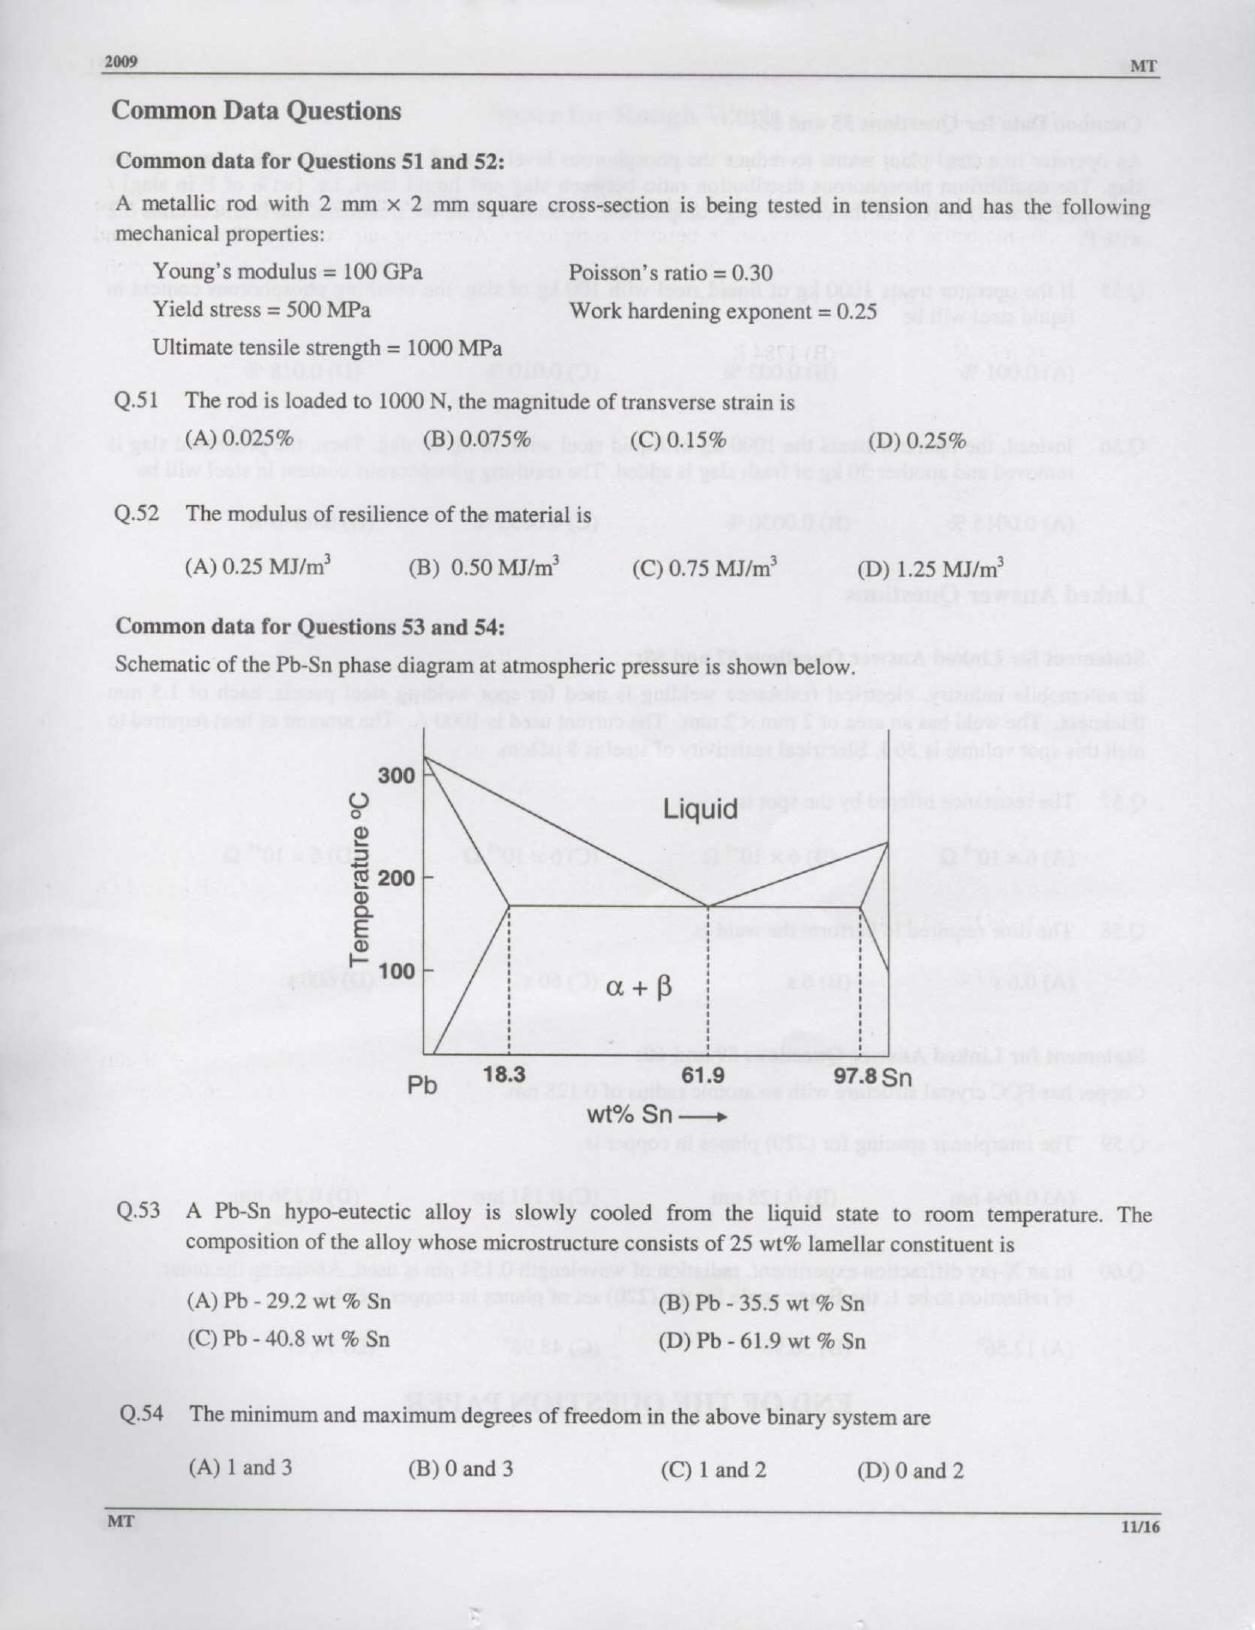 GATE 2009 Metallurgical Engineering (MT) Question Paper with Answer Key - Page 11